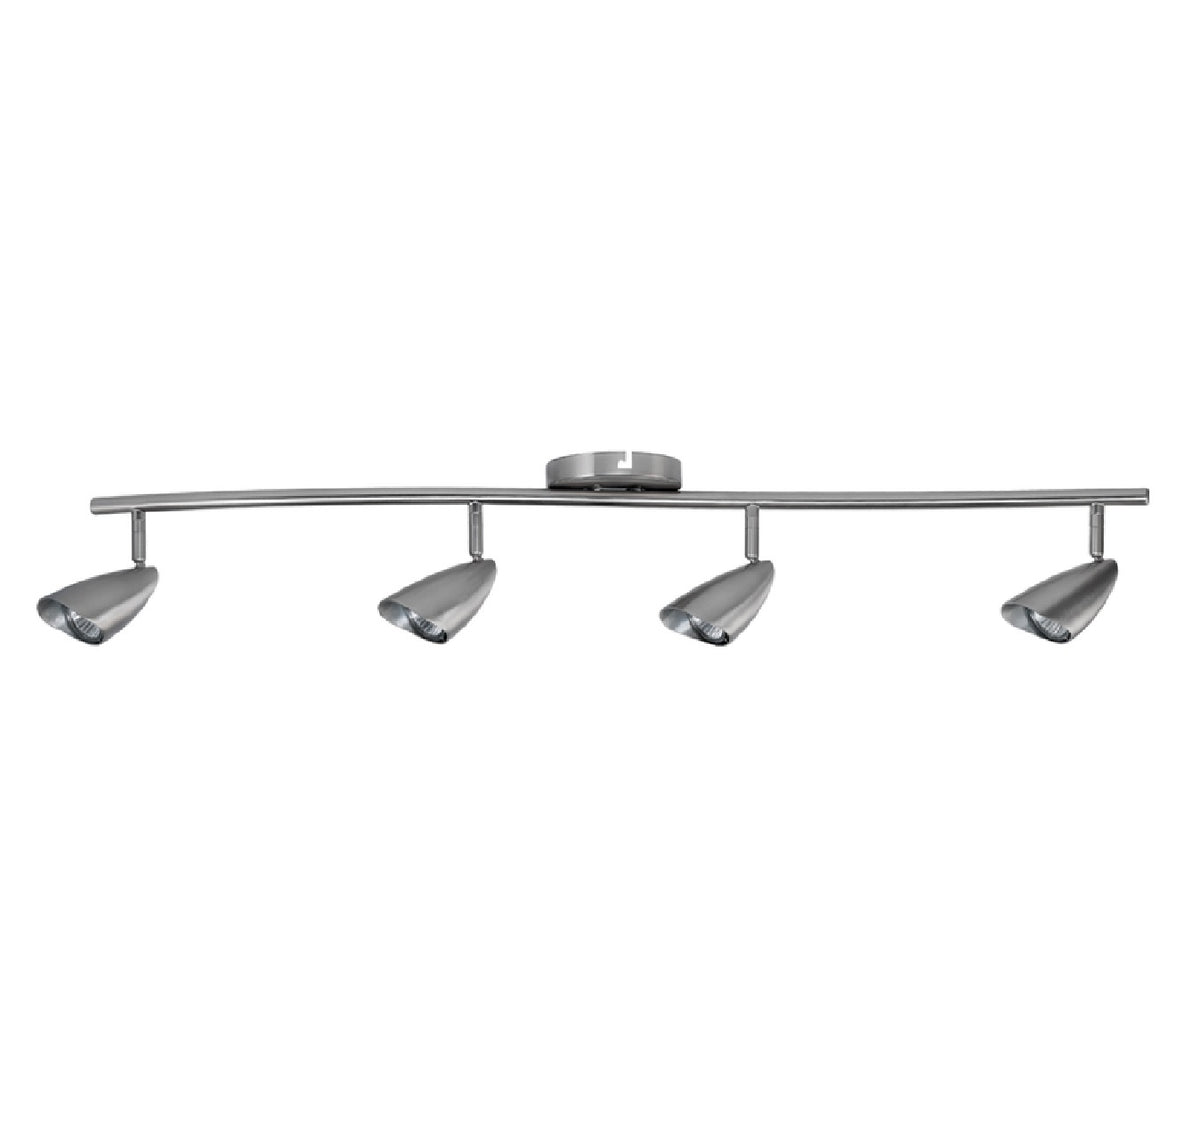 buy track light fixtures at cheap rate in bulk. wholesale & retail lamp supplies store. home décor ideas, maintenance, repair replacement parts